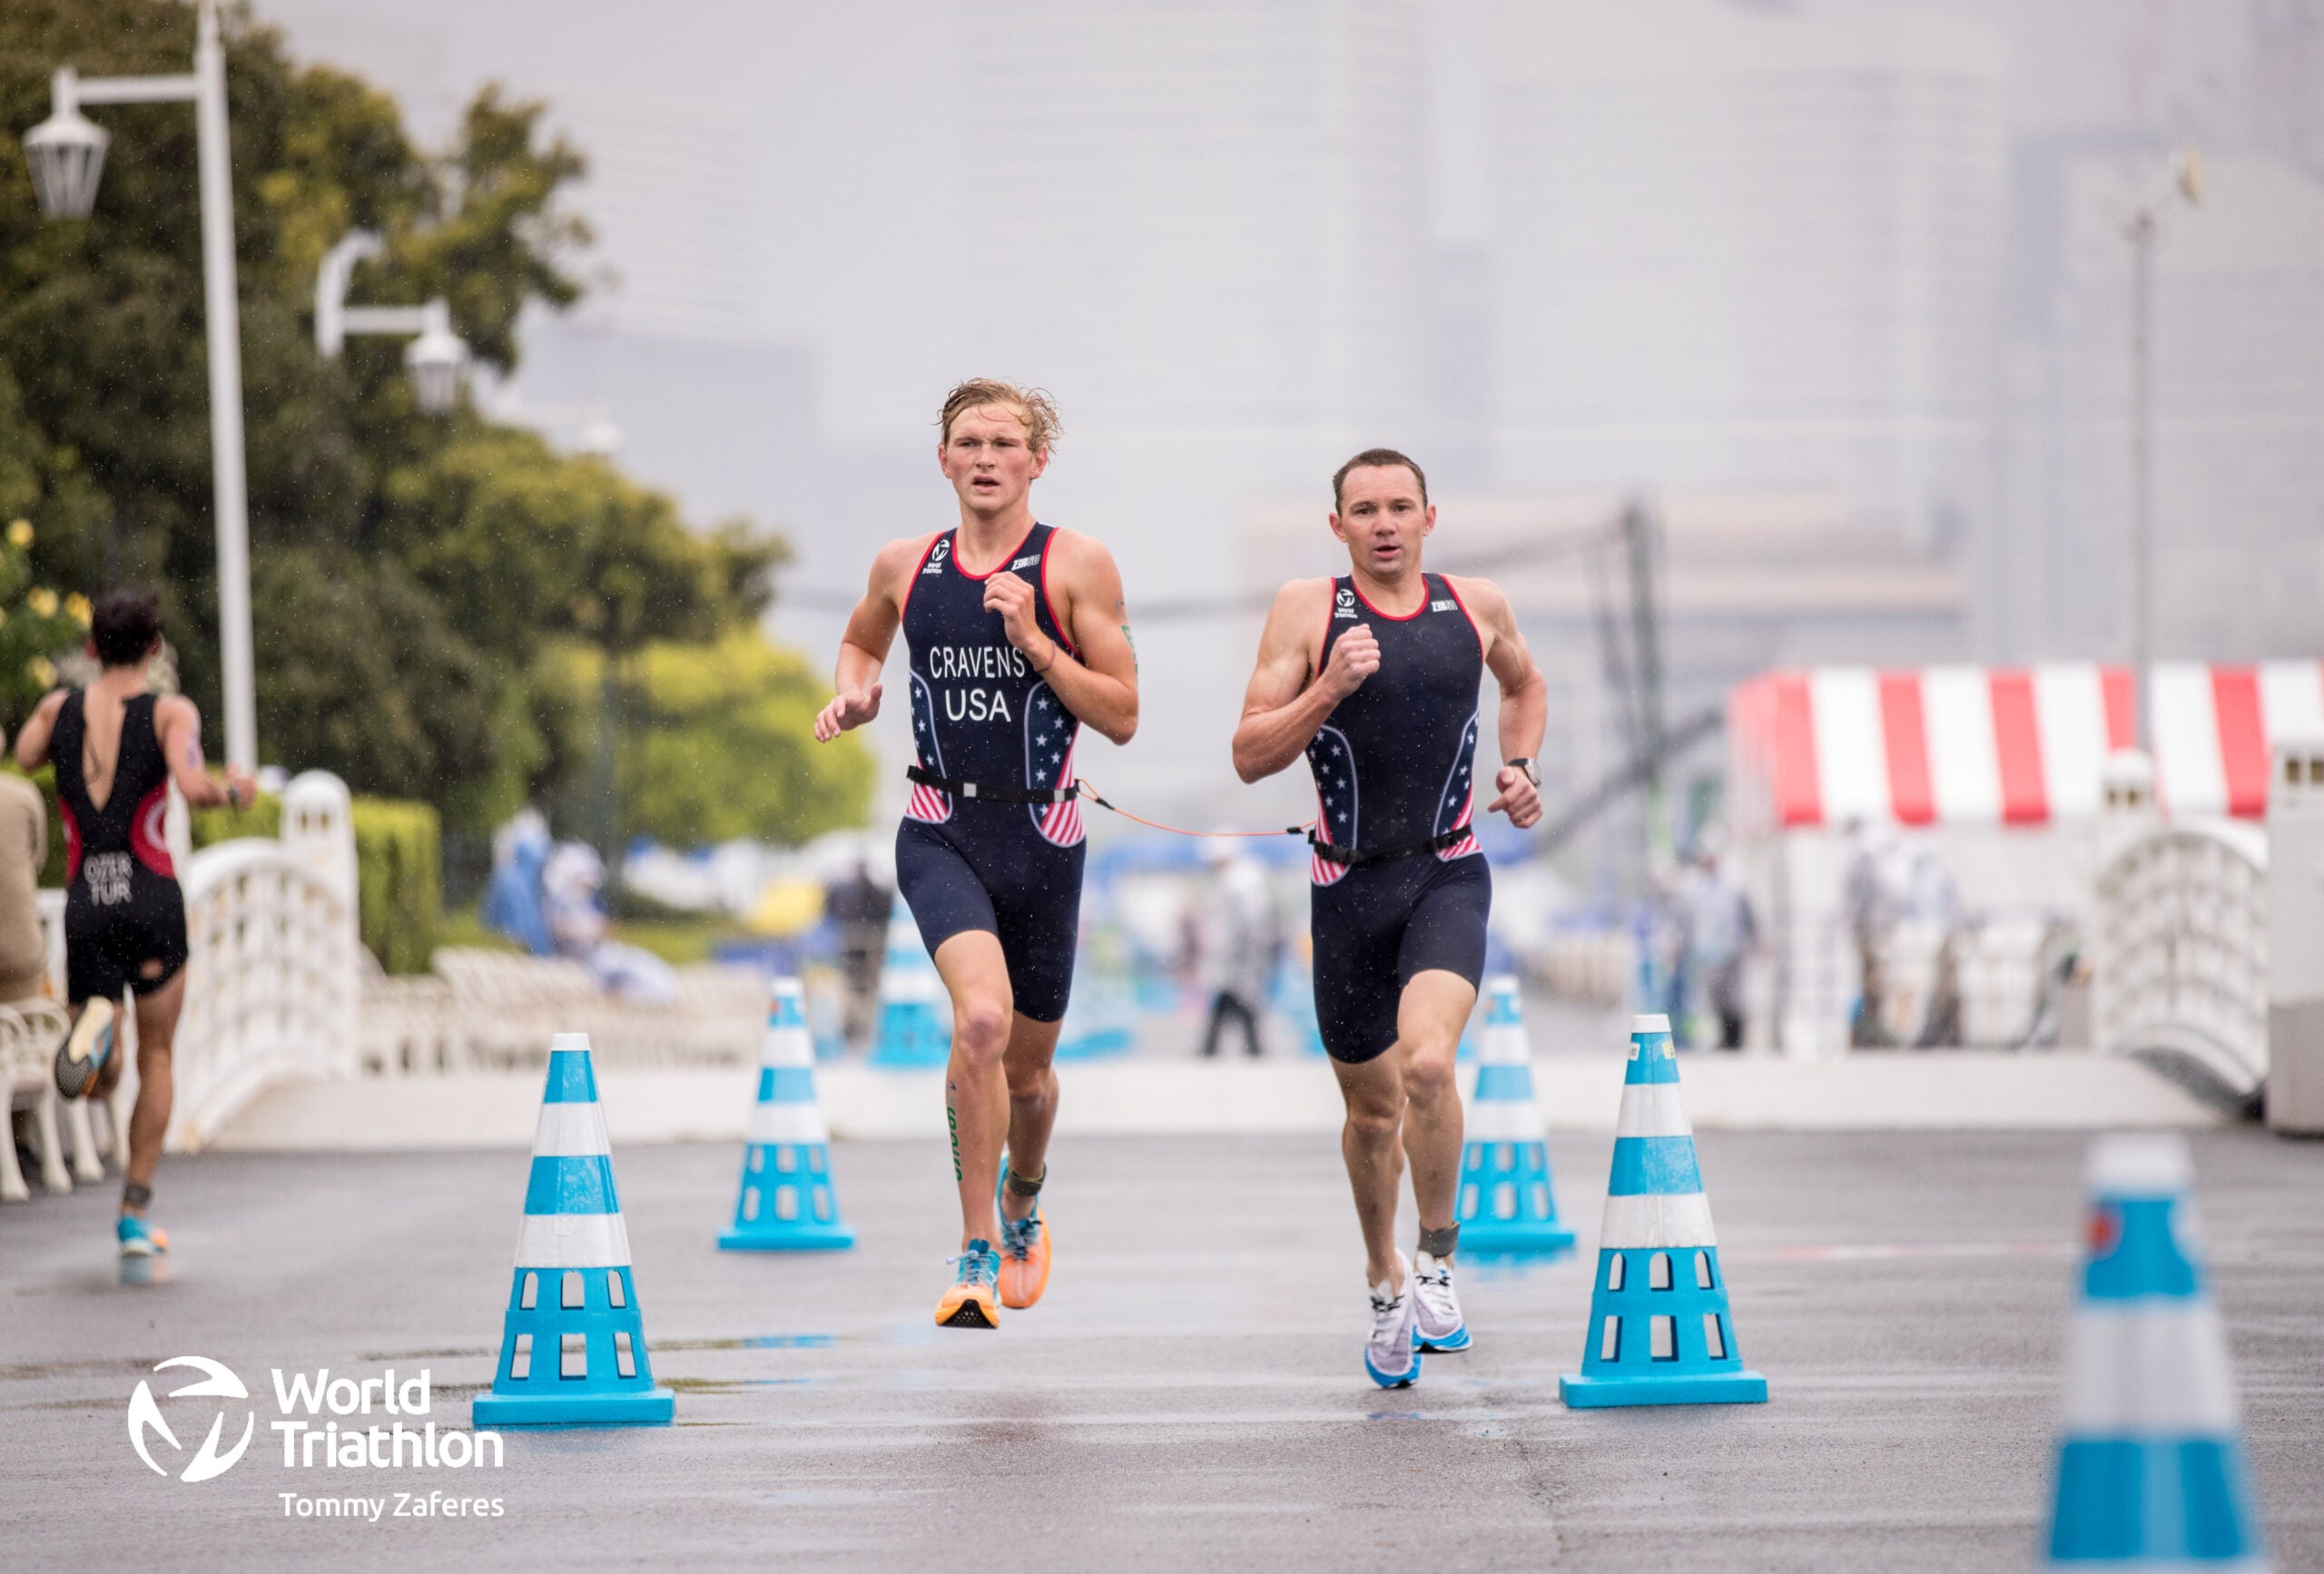 Owen Cravens trains with Project Podium, USA Triathlon’s men’s elite development squad based in Tempe, Arizona, and is guided by men’s long-course pro Ben Hoffman.